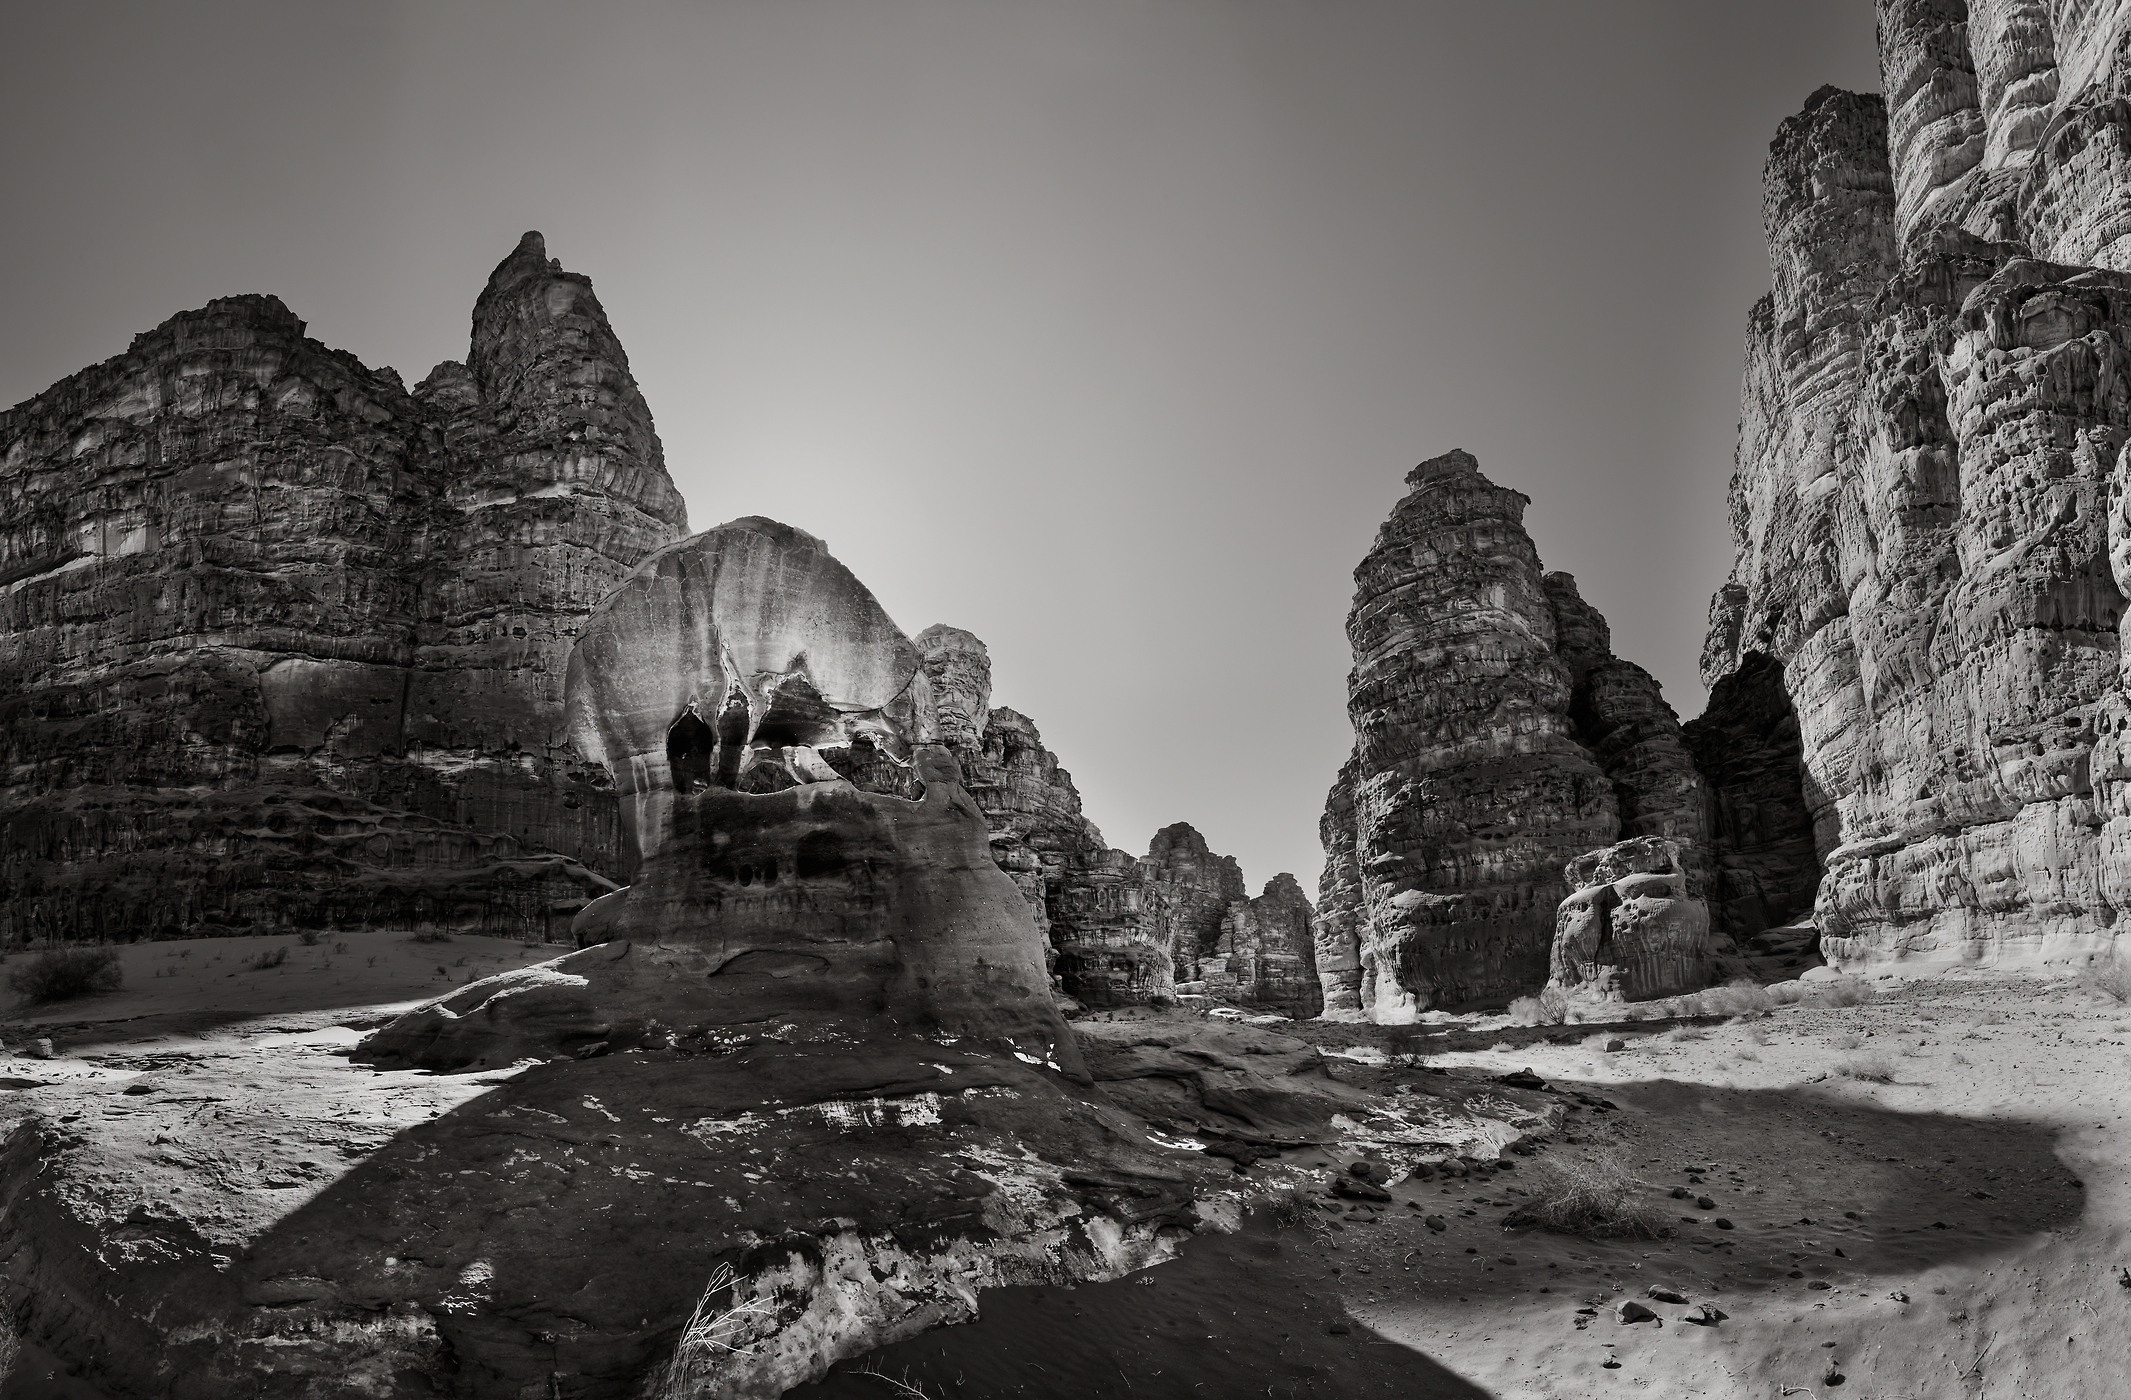 484 megapixels! A very high resolution, large-format VAST photo print of unique rock formations in the desert; black & white fine art photograph created by Peter Rodger in Tabuk, Saudi Arabia.